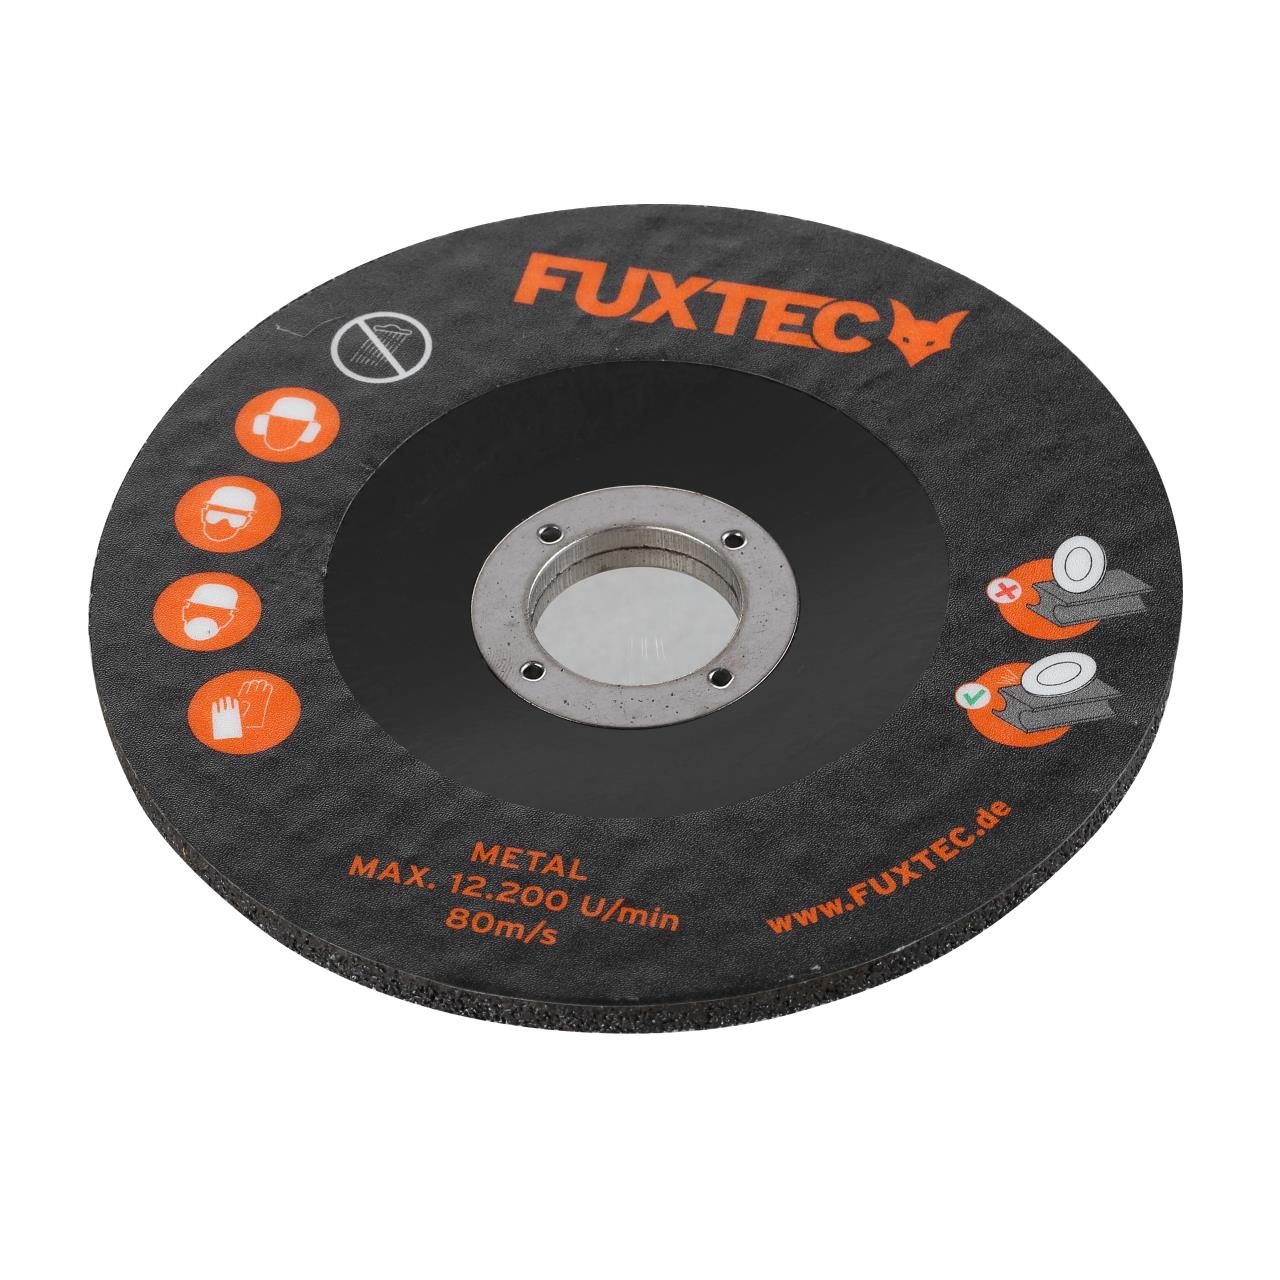 Original FUXTEC grinding discs / roughing discs set of 5 - for cordless 20V angle grinder FX-E1WS20